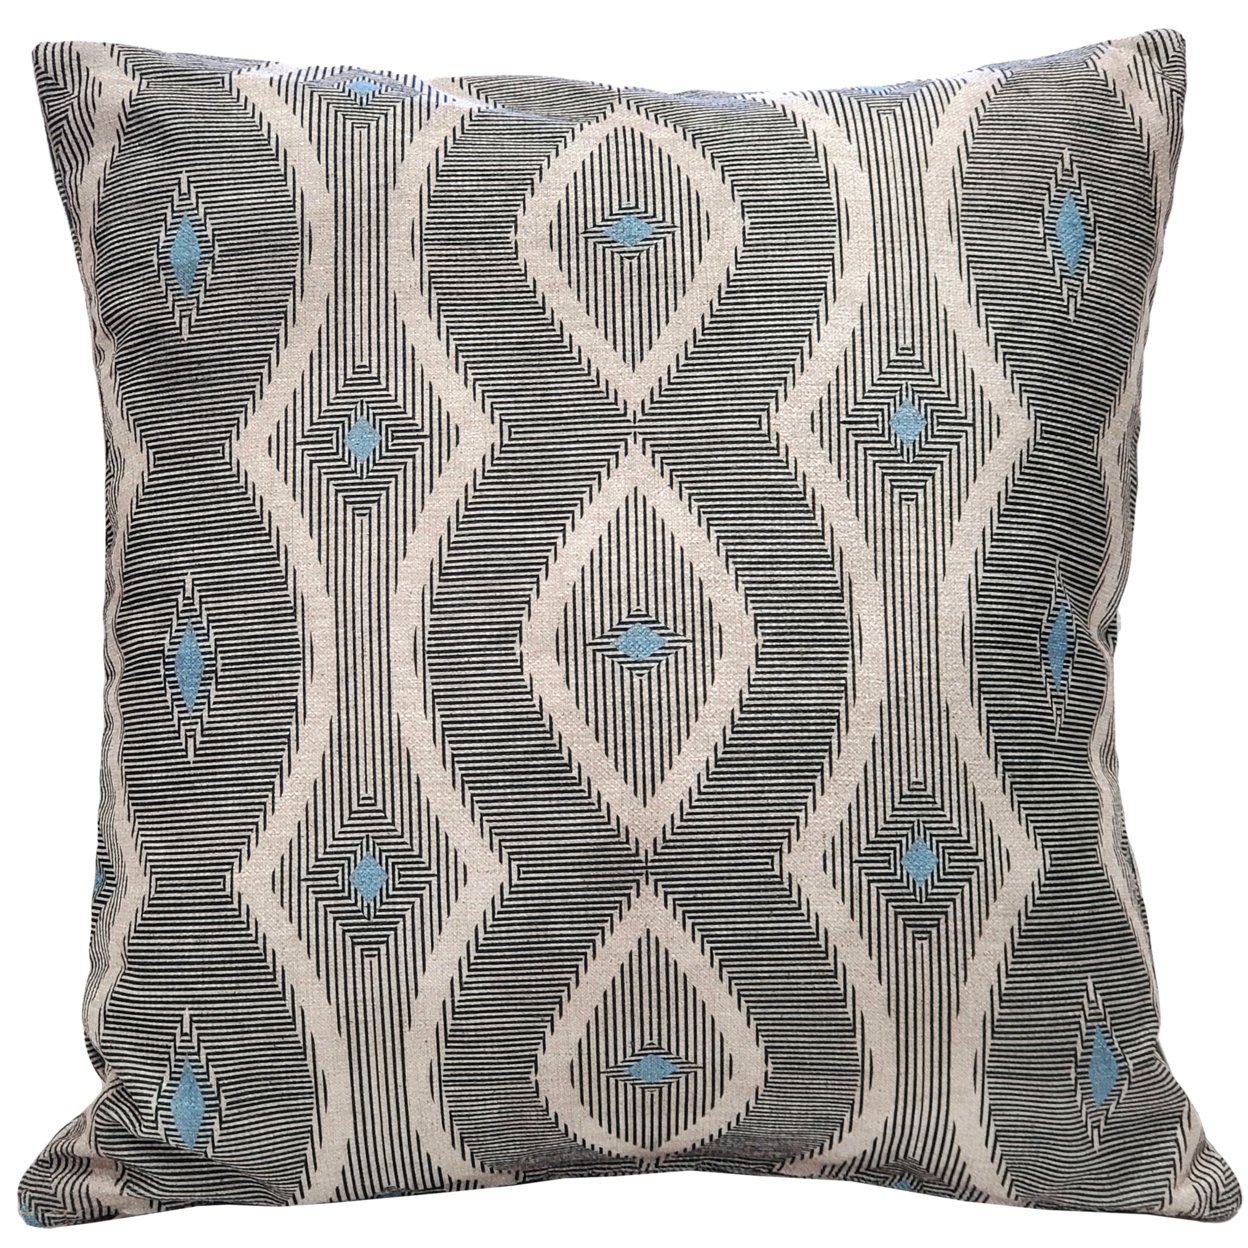 Desmond Blue Diamond Pillow 19x19 Inches Square, Complete Pillow with Polyfill Pillow Insert